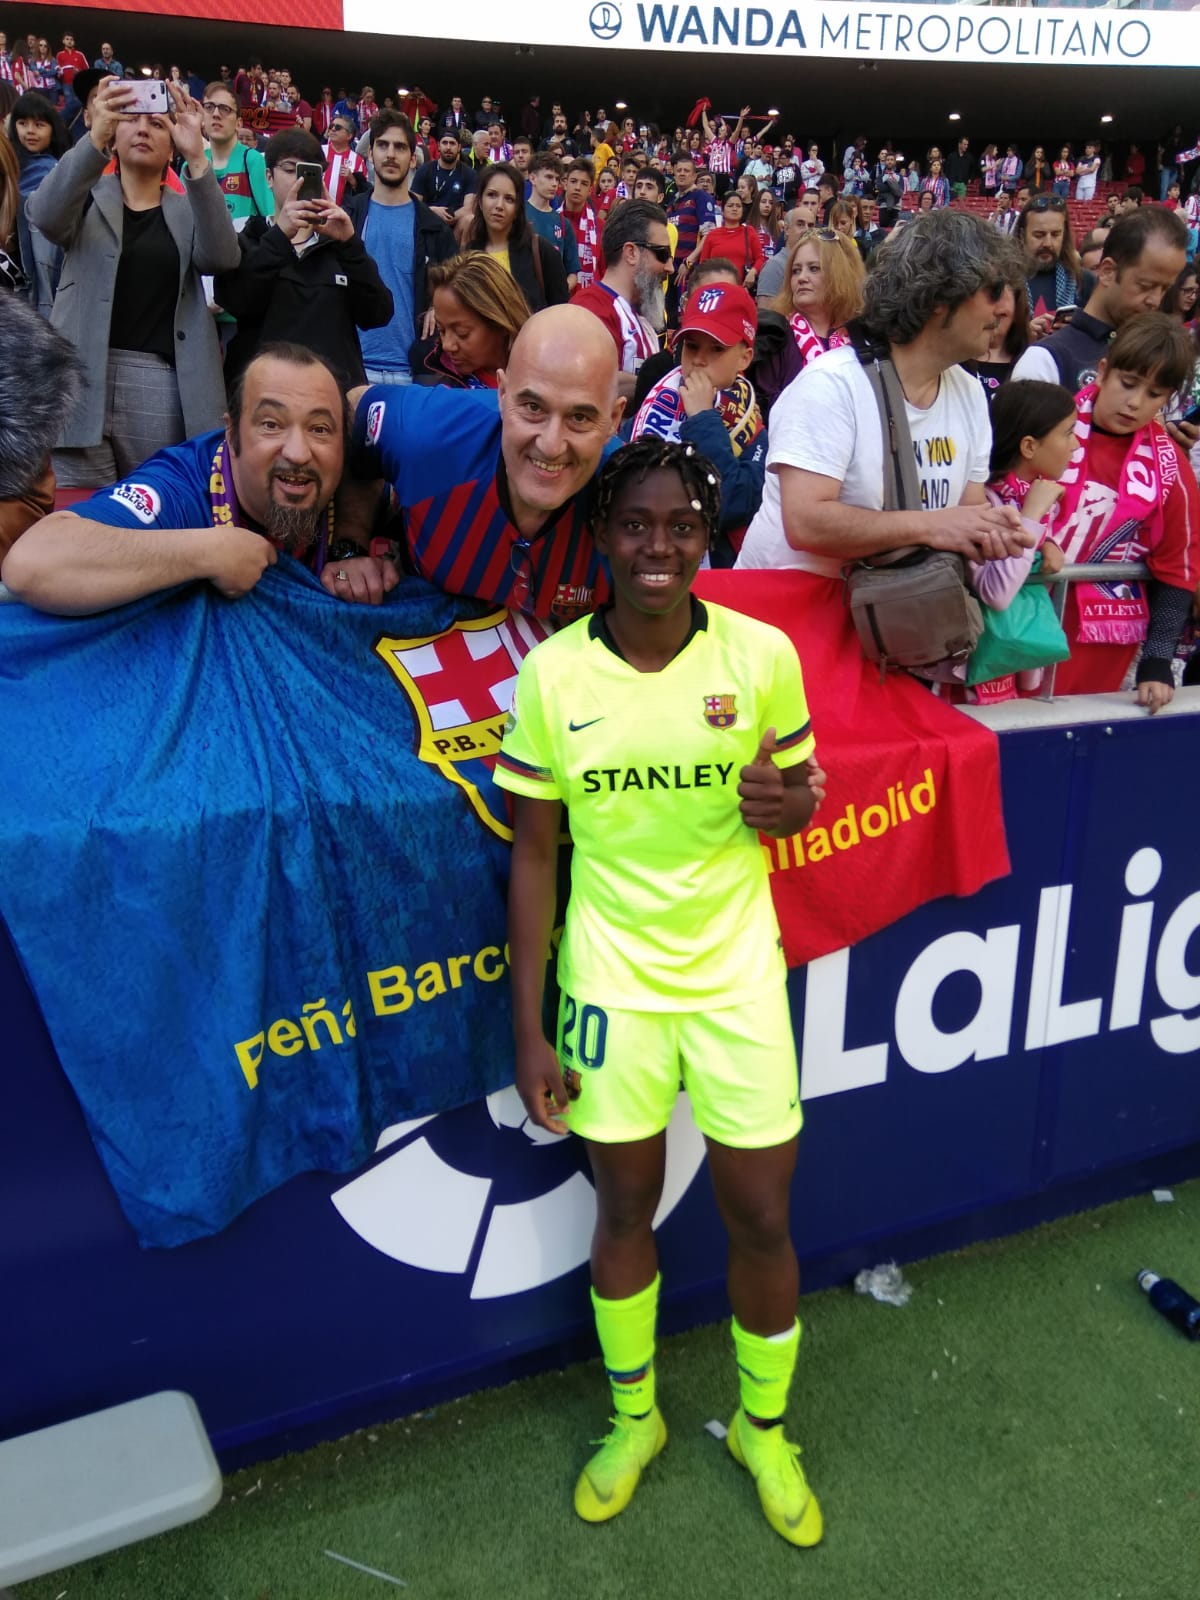 Oshoala Vows To Bounce Back Stronger From Injury-Induced Setback